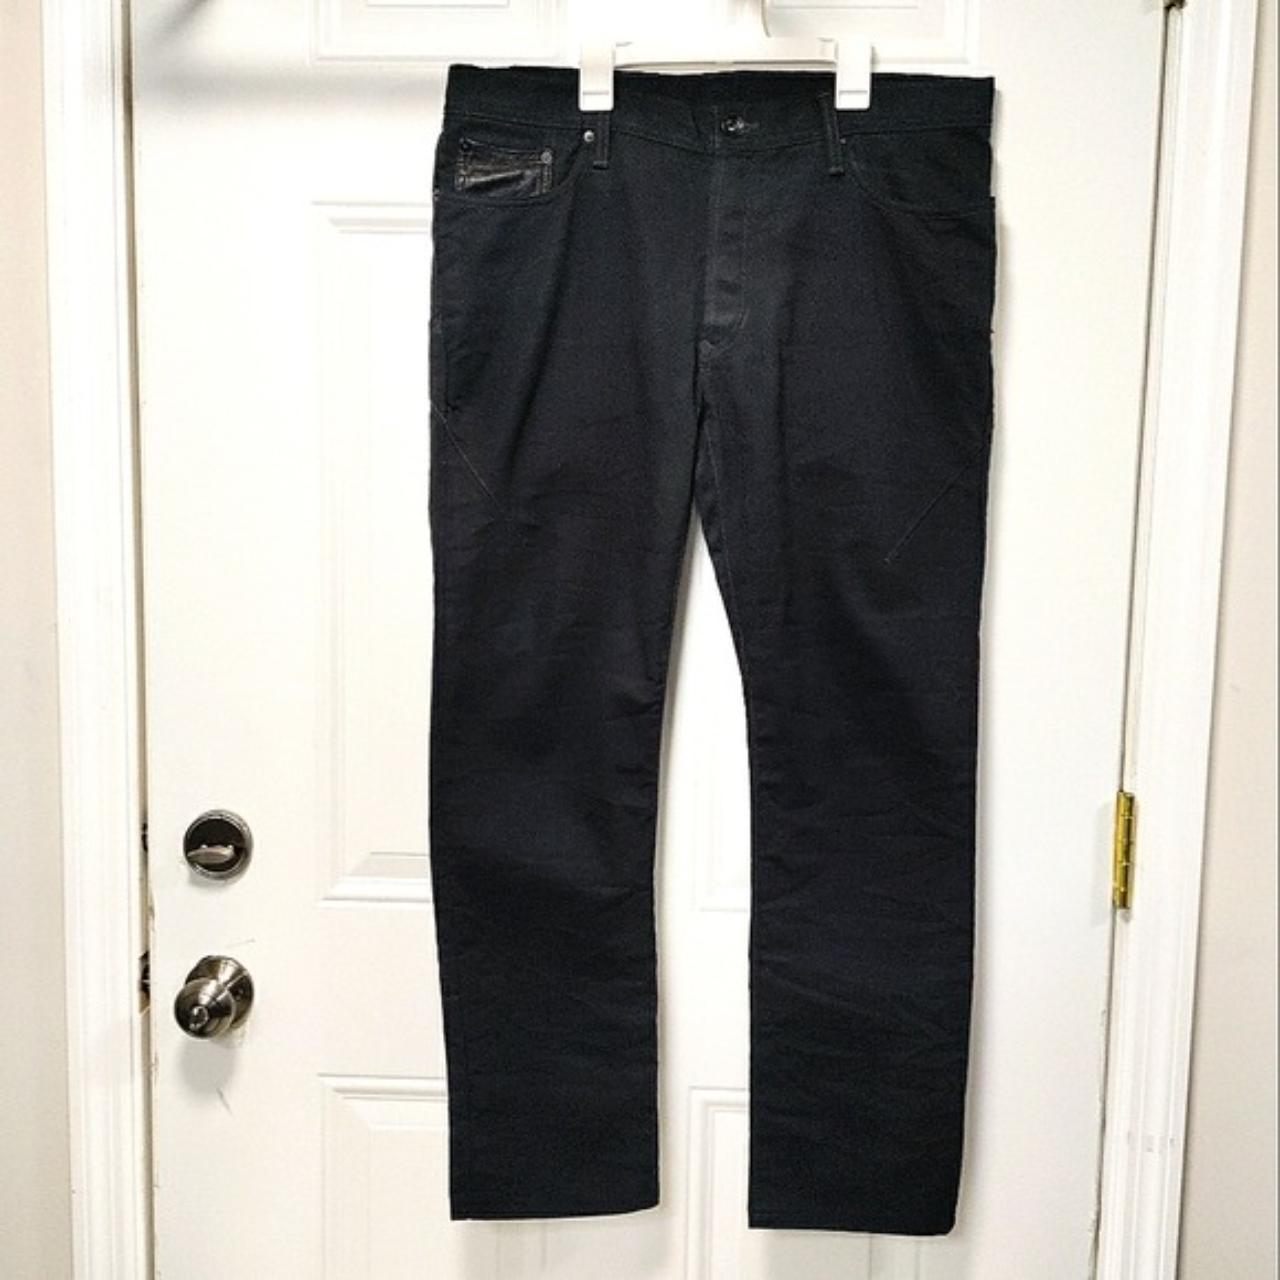 Product Image 1 - Rogue Black Leather accents Jeans